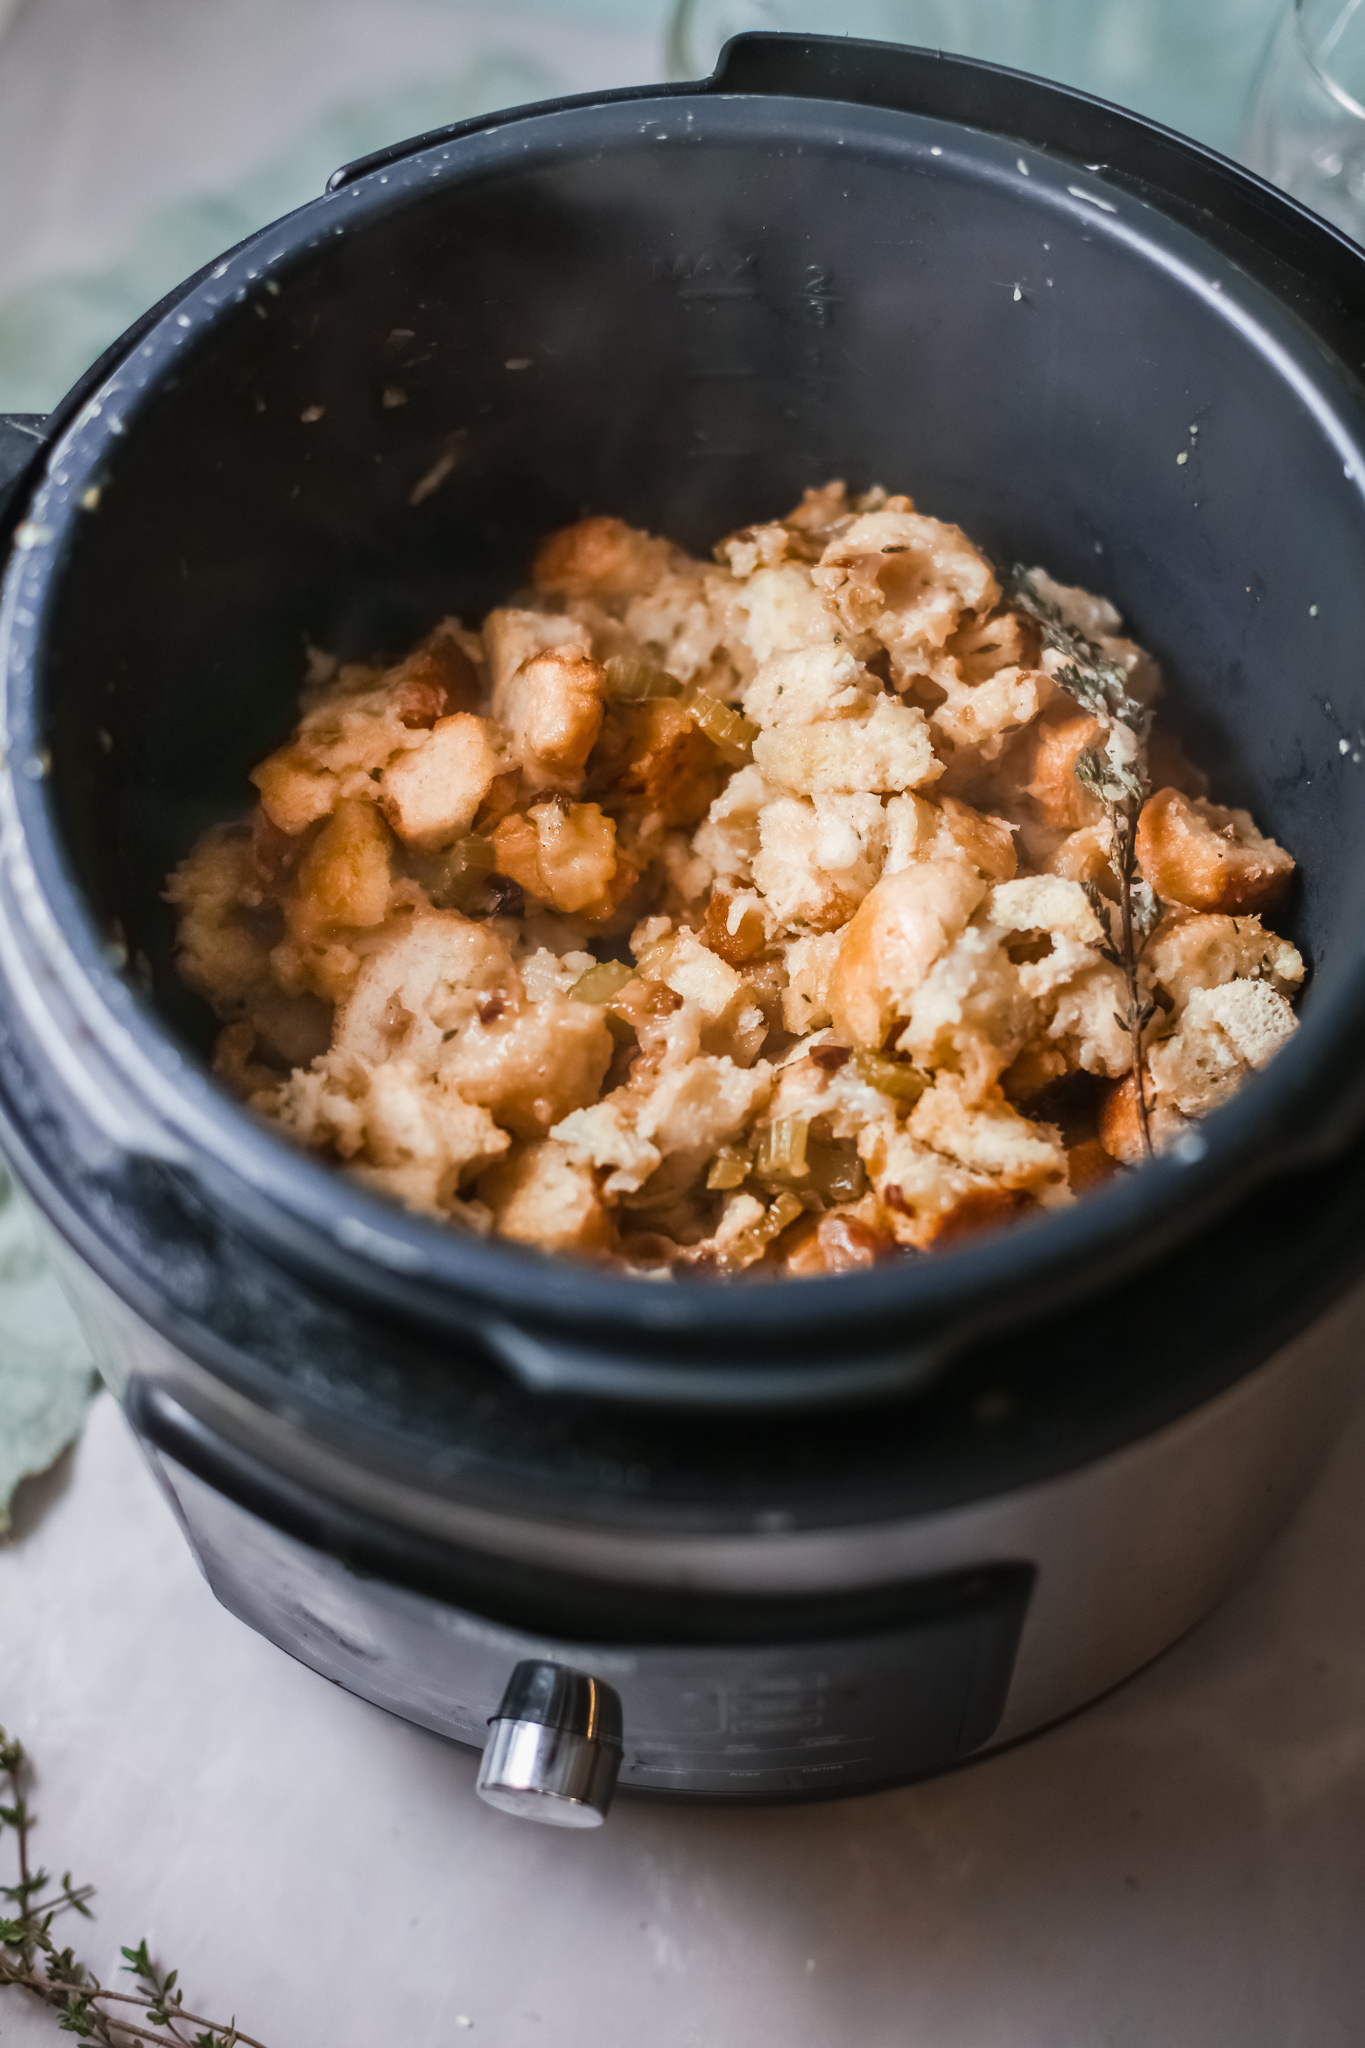 cooked instant pot stuffing inside the instant pot with herb garnish